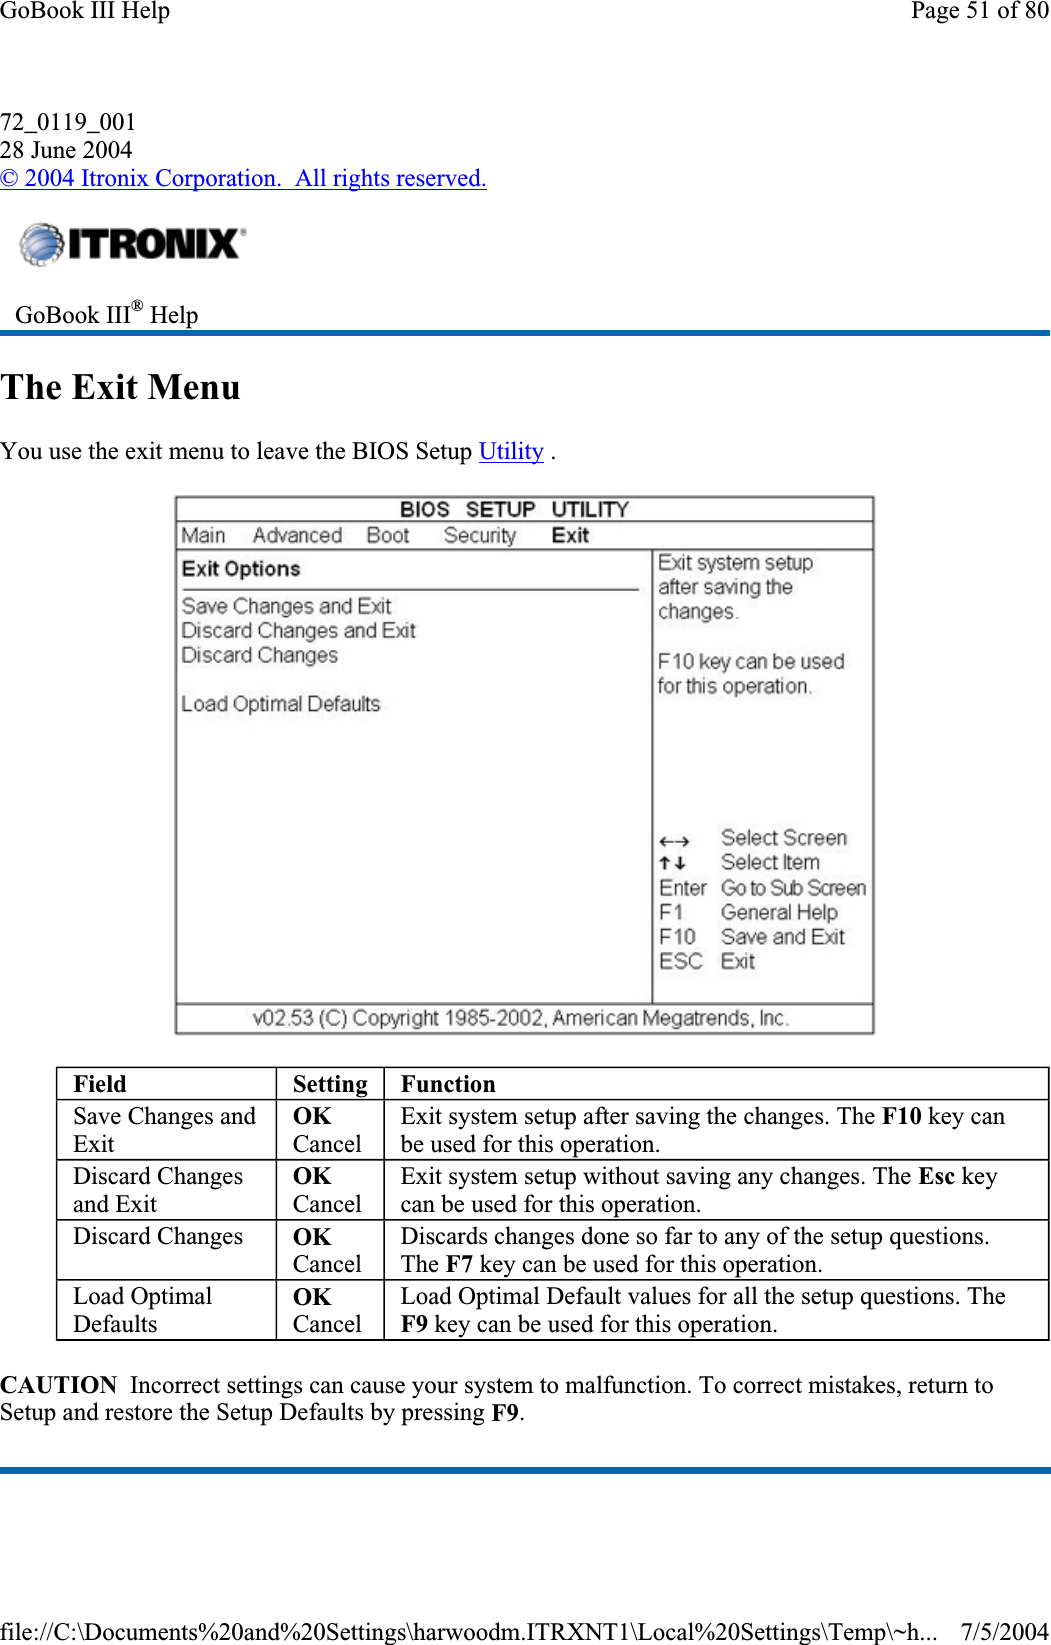 72_0119_00128 June 2004©2004 Itronix Corporation.  All rights reserved.The Exit Menu You use the exit menu to leave the BIOS Setup Utility . CAUTION  Incorrect settings can cause your system to malfunction. To correct mistakes, return to Setup and restore the Setup Defaults by pressing F9.GoBook III® HelpField Setting FunctionSave Changes and ExitOKCancelExit system setup after saving the changes. The F10 key can be used for this operation. Discard Changes and Exit OKCancelExit system setup without saving any changes. The Esc key can be used for this operation. Discard Changes  OKCancelDiscards changes done so far to any of the setup questions. The F7 key can be used for this operation. Load Optimal DefaultsOKCancelLoad Optimal Default values for all the setup questions. The F9 key can be used for this operation. Page 51 of 80GoBook III Help7/5/2004file://C:\Documents%20and%20Settings\harwoodm.ITRXNT1\Local%20Settings\Temp\~h...